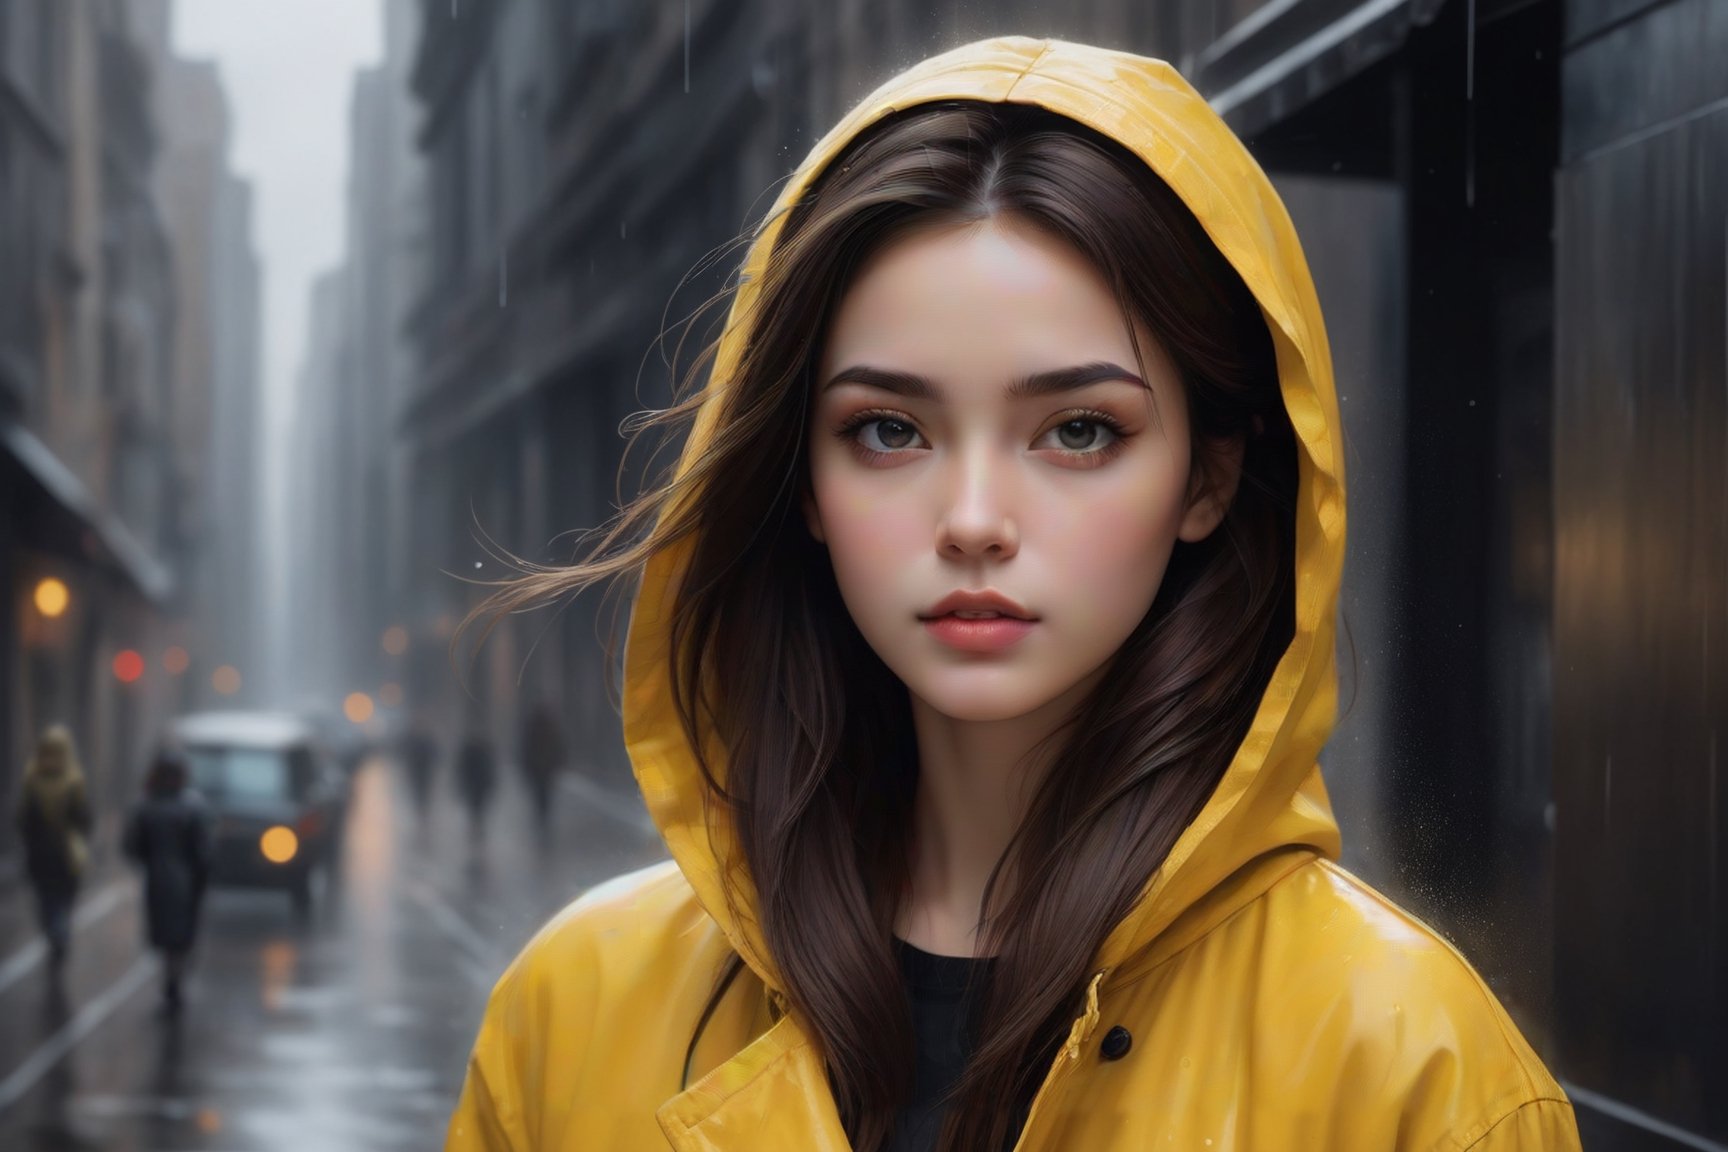 Generate an artisvic vision of watercolor portrait of a beautiful girl in a yellow raincoat,20yo,walking in a dark raining street.fullbody.graffiti style.(Rough strokes).Mystical.Mysterious.Ethereal.Dim lights in the street.Dark and Hazy background.puddles.rain.fog. spotlight on her face.low key.(chiaroscuro lighting),blurry backdrop.BREAK rule of thirds,depth of perspective,perfect composition,impressionism,clear facial features,perfect hands,aesthetic minimalism,painterly,by Karol Bak,Alessandro Pautasso and Hayao Miyazaki, real_booster, art_booster